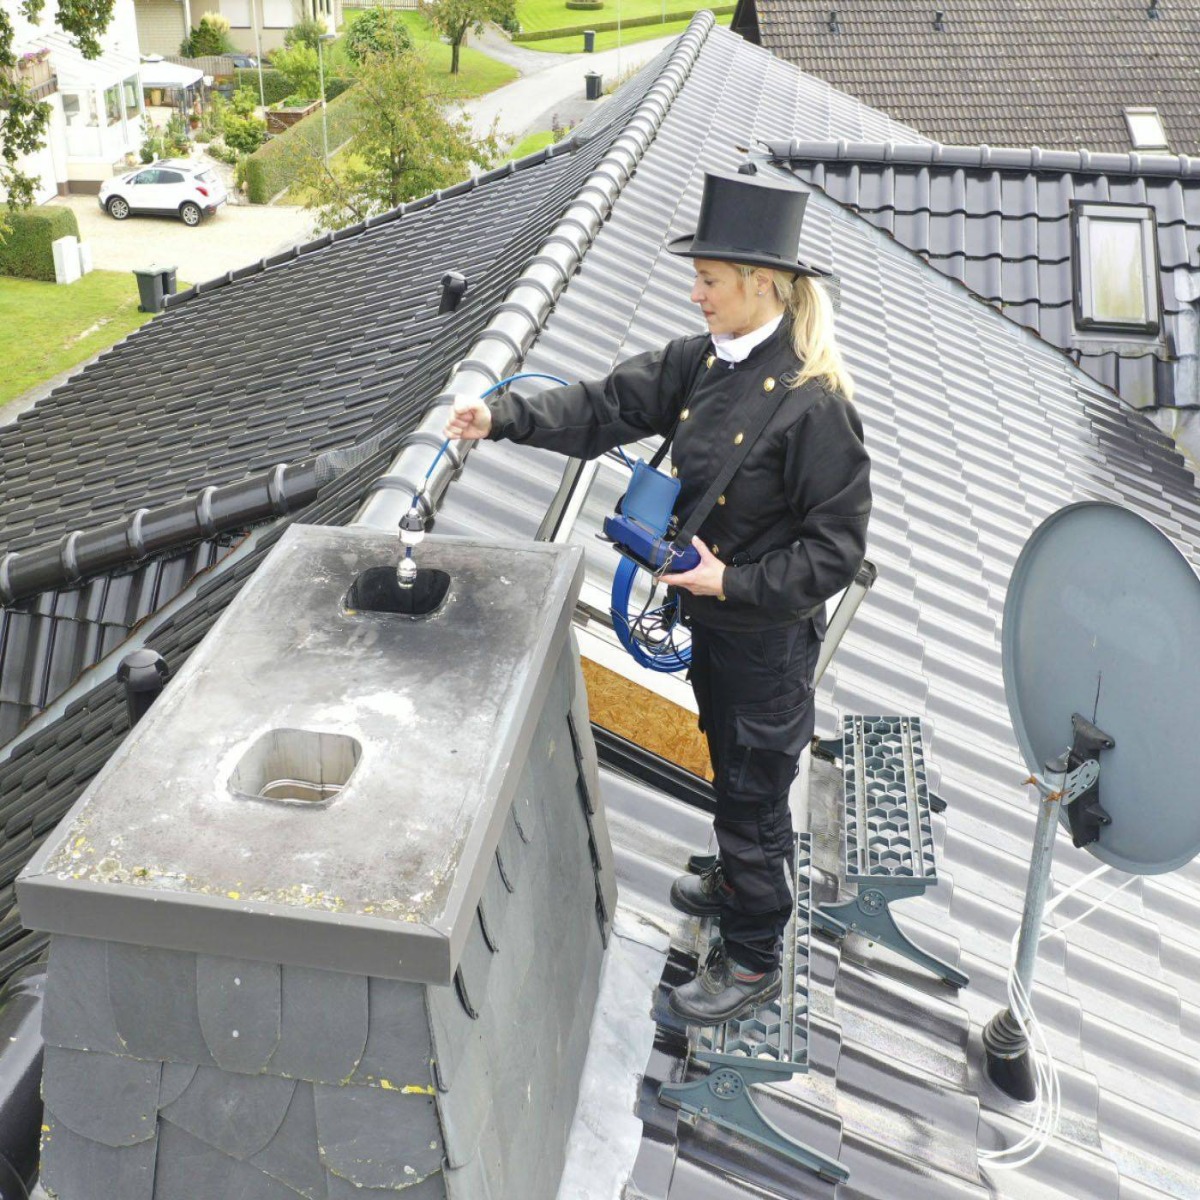 Wöhler WO12342 VIS 500 Inspection Camera INT being used on a roof vent.